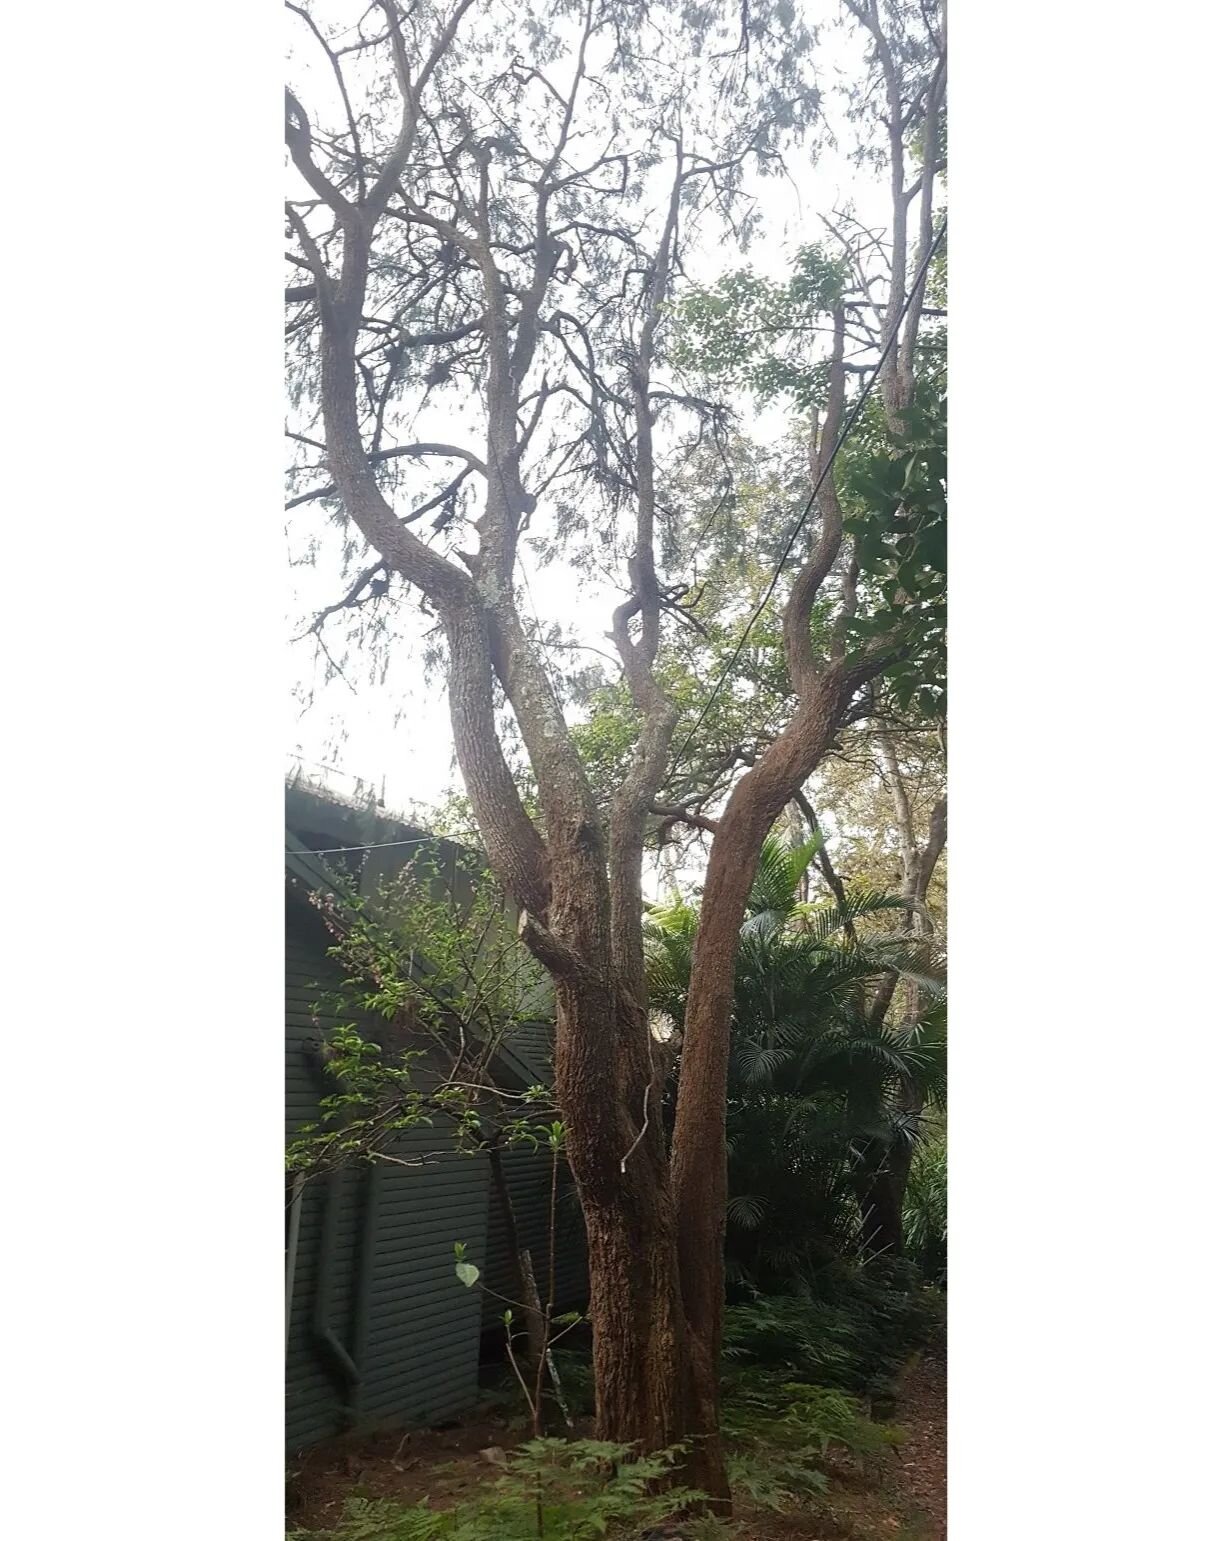 This tree was quite a conundrum. On the one hand, it is a casuarina (or She-oak) which is one of the few food sources for Glossy Black Cockatoos which occassionally visit us, and a beautiful native mature canopy tree. On the other hand the tree is ve